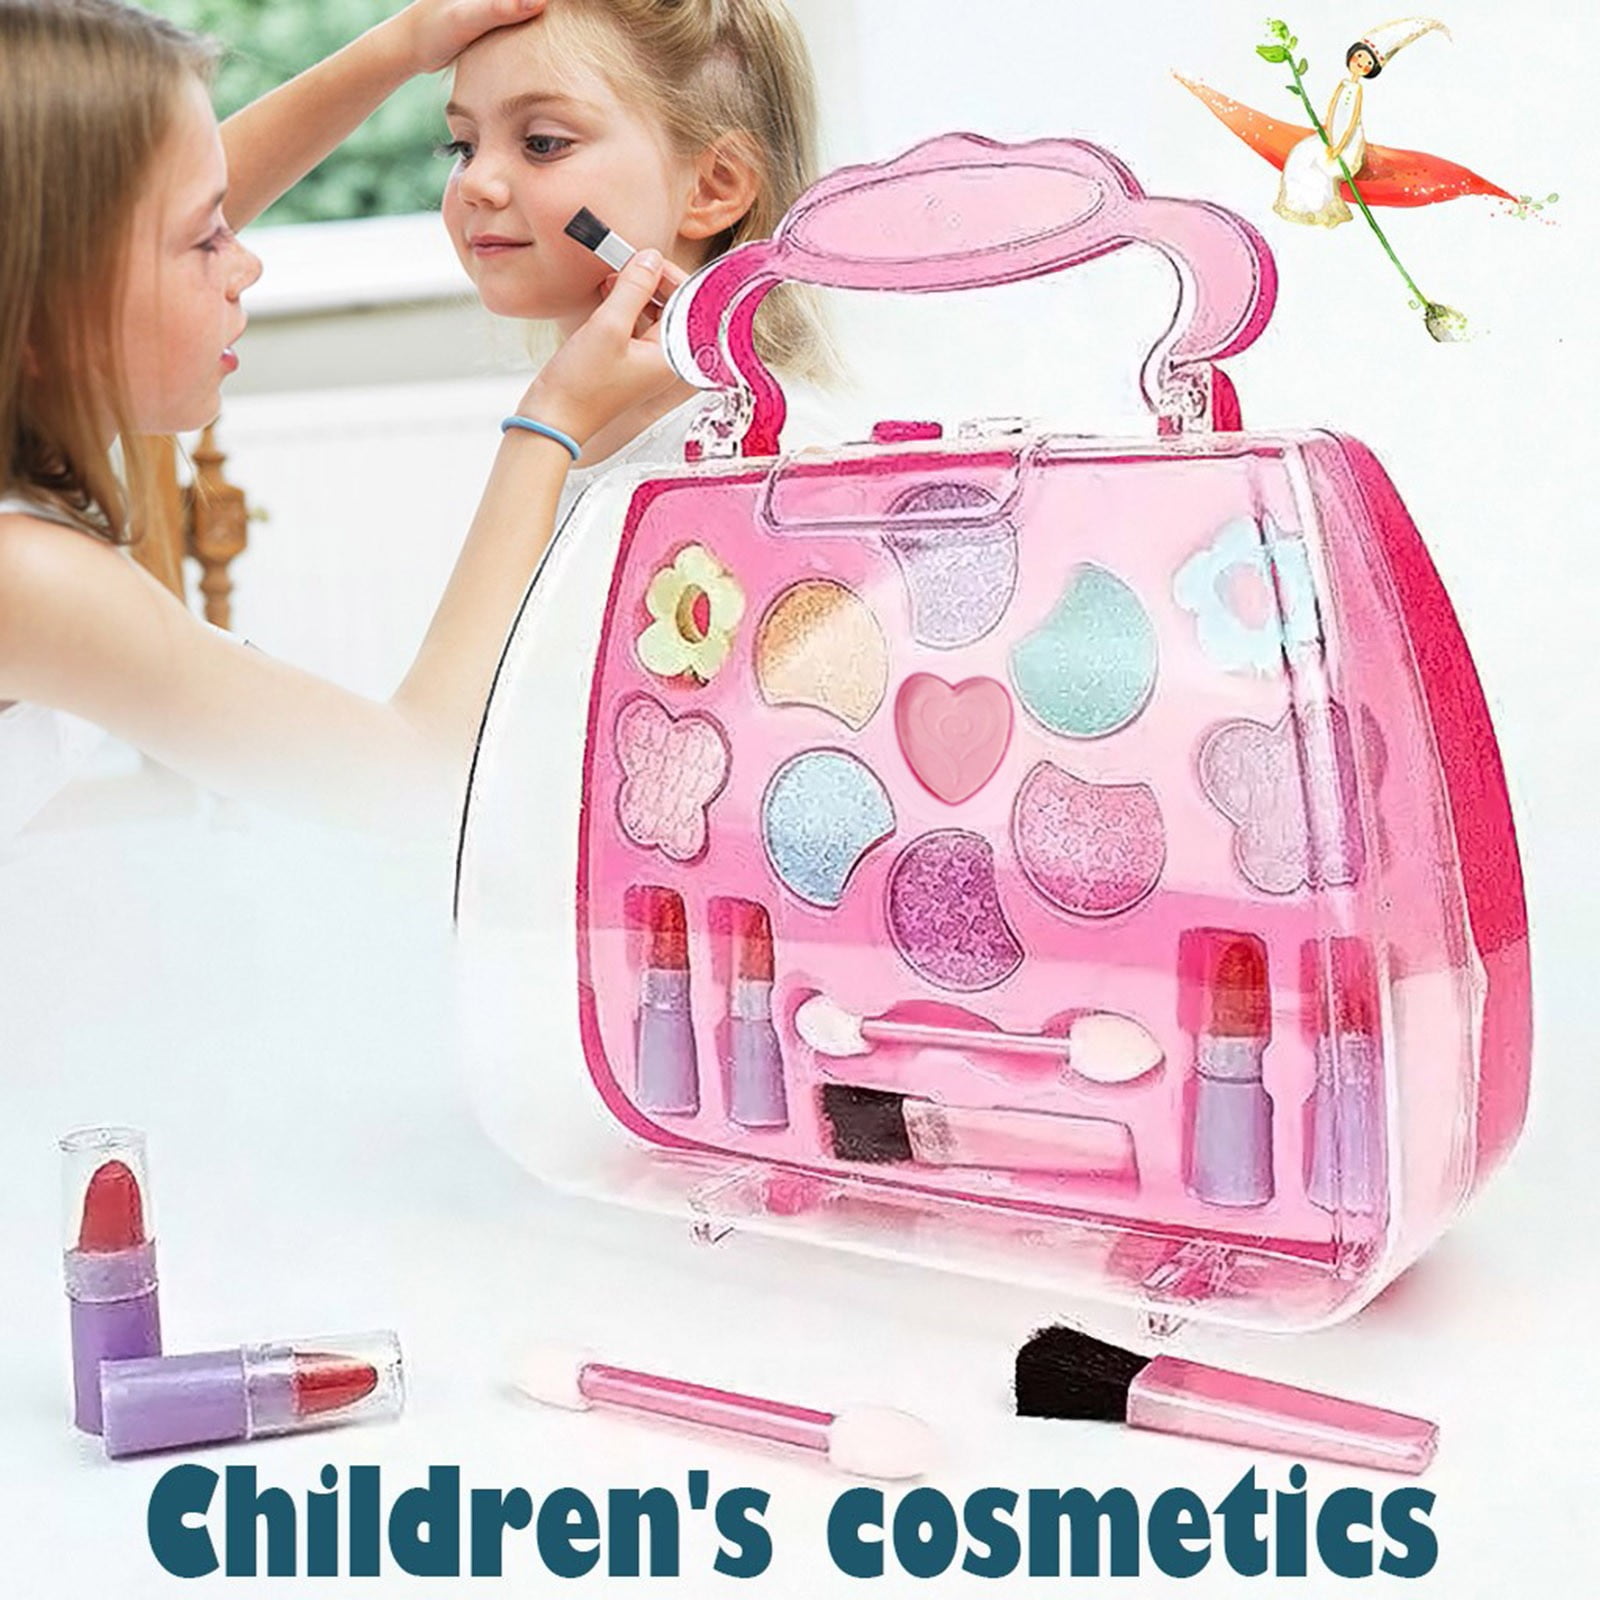 Toy Cosmetic Set Kit Kids Girls For Little Toys Pretend Makeup Play ...